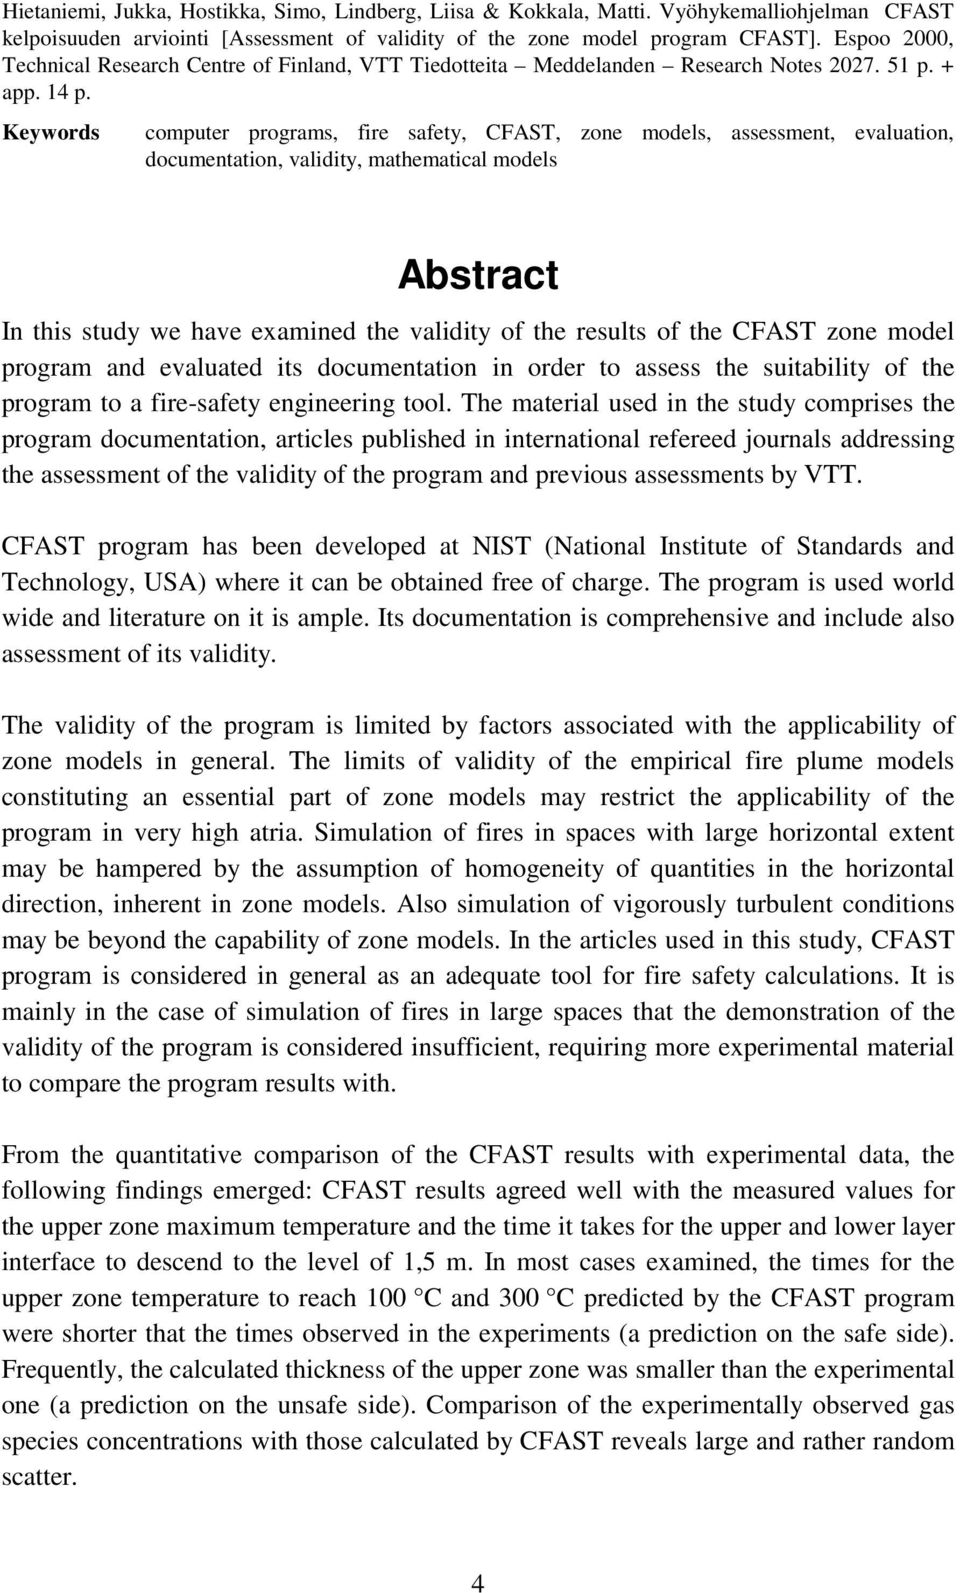 Keywords computer programs, fire safety, CFAST, zone models, assessment, evaluation, documentation, validity, mathematical models Abstract In this study we have examined the validity of the results